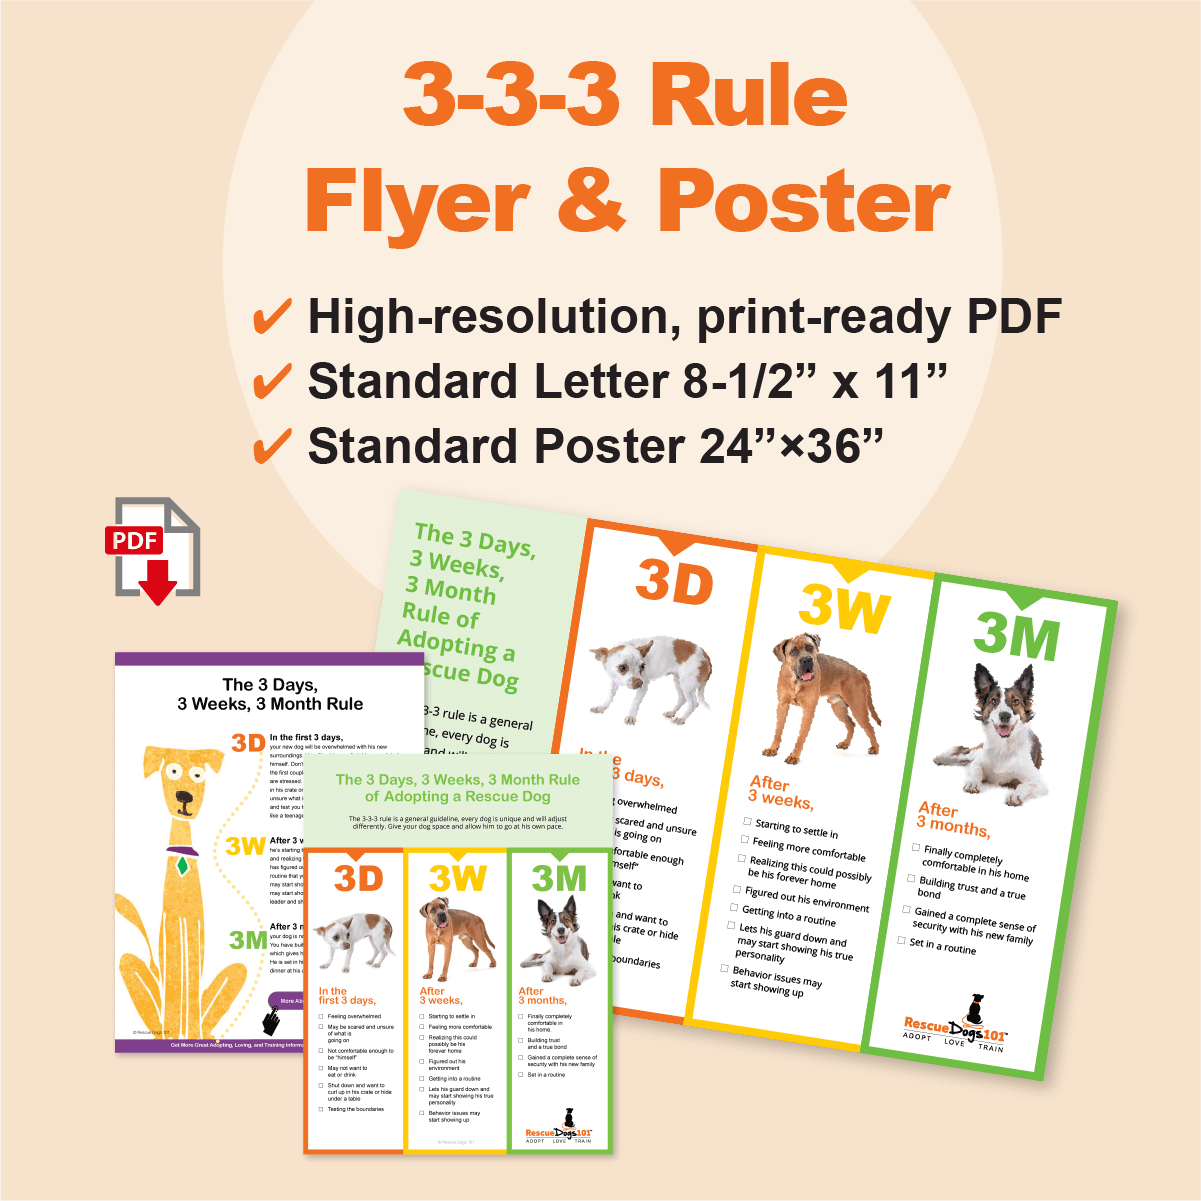 3-3-3 Rule Flyer & Poster For Commercial Use